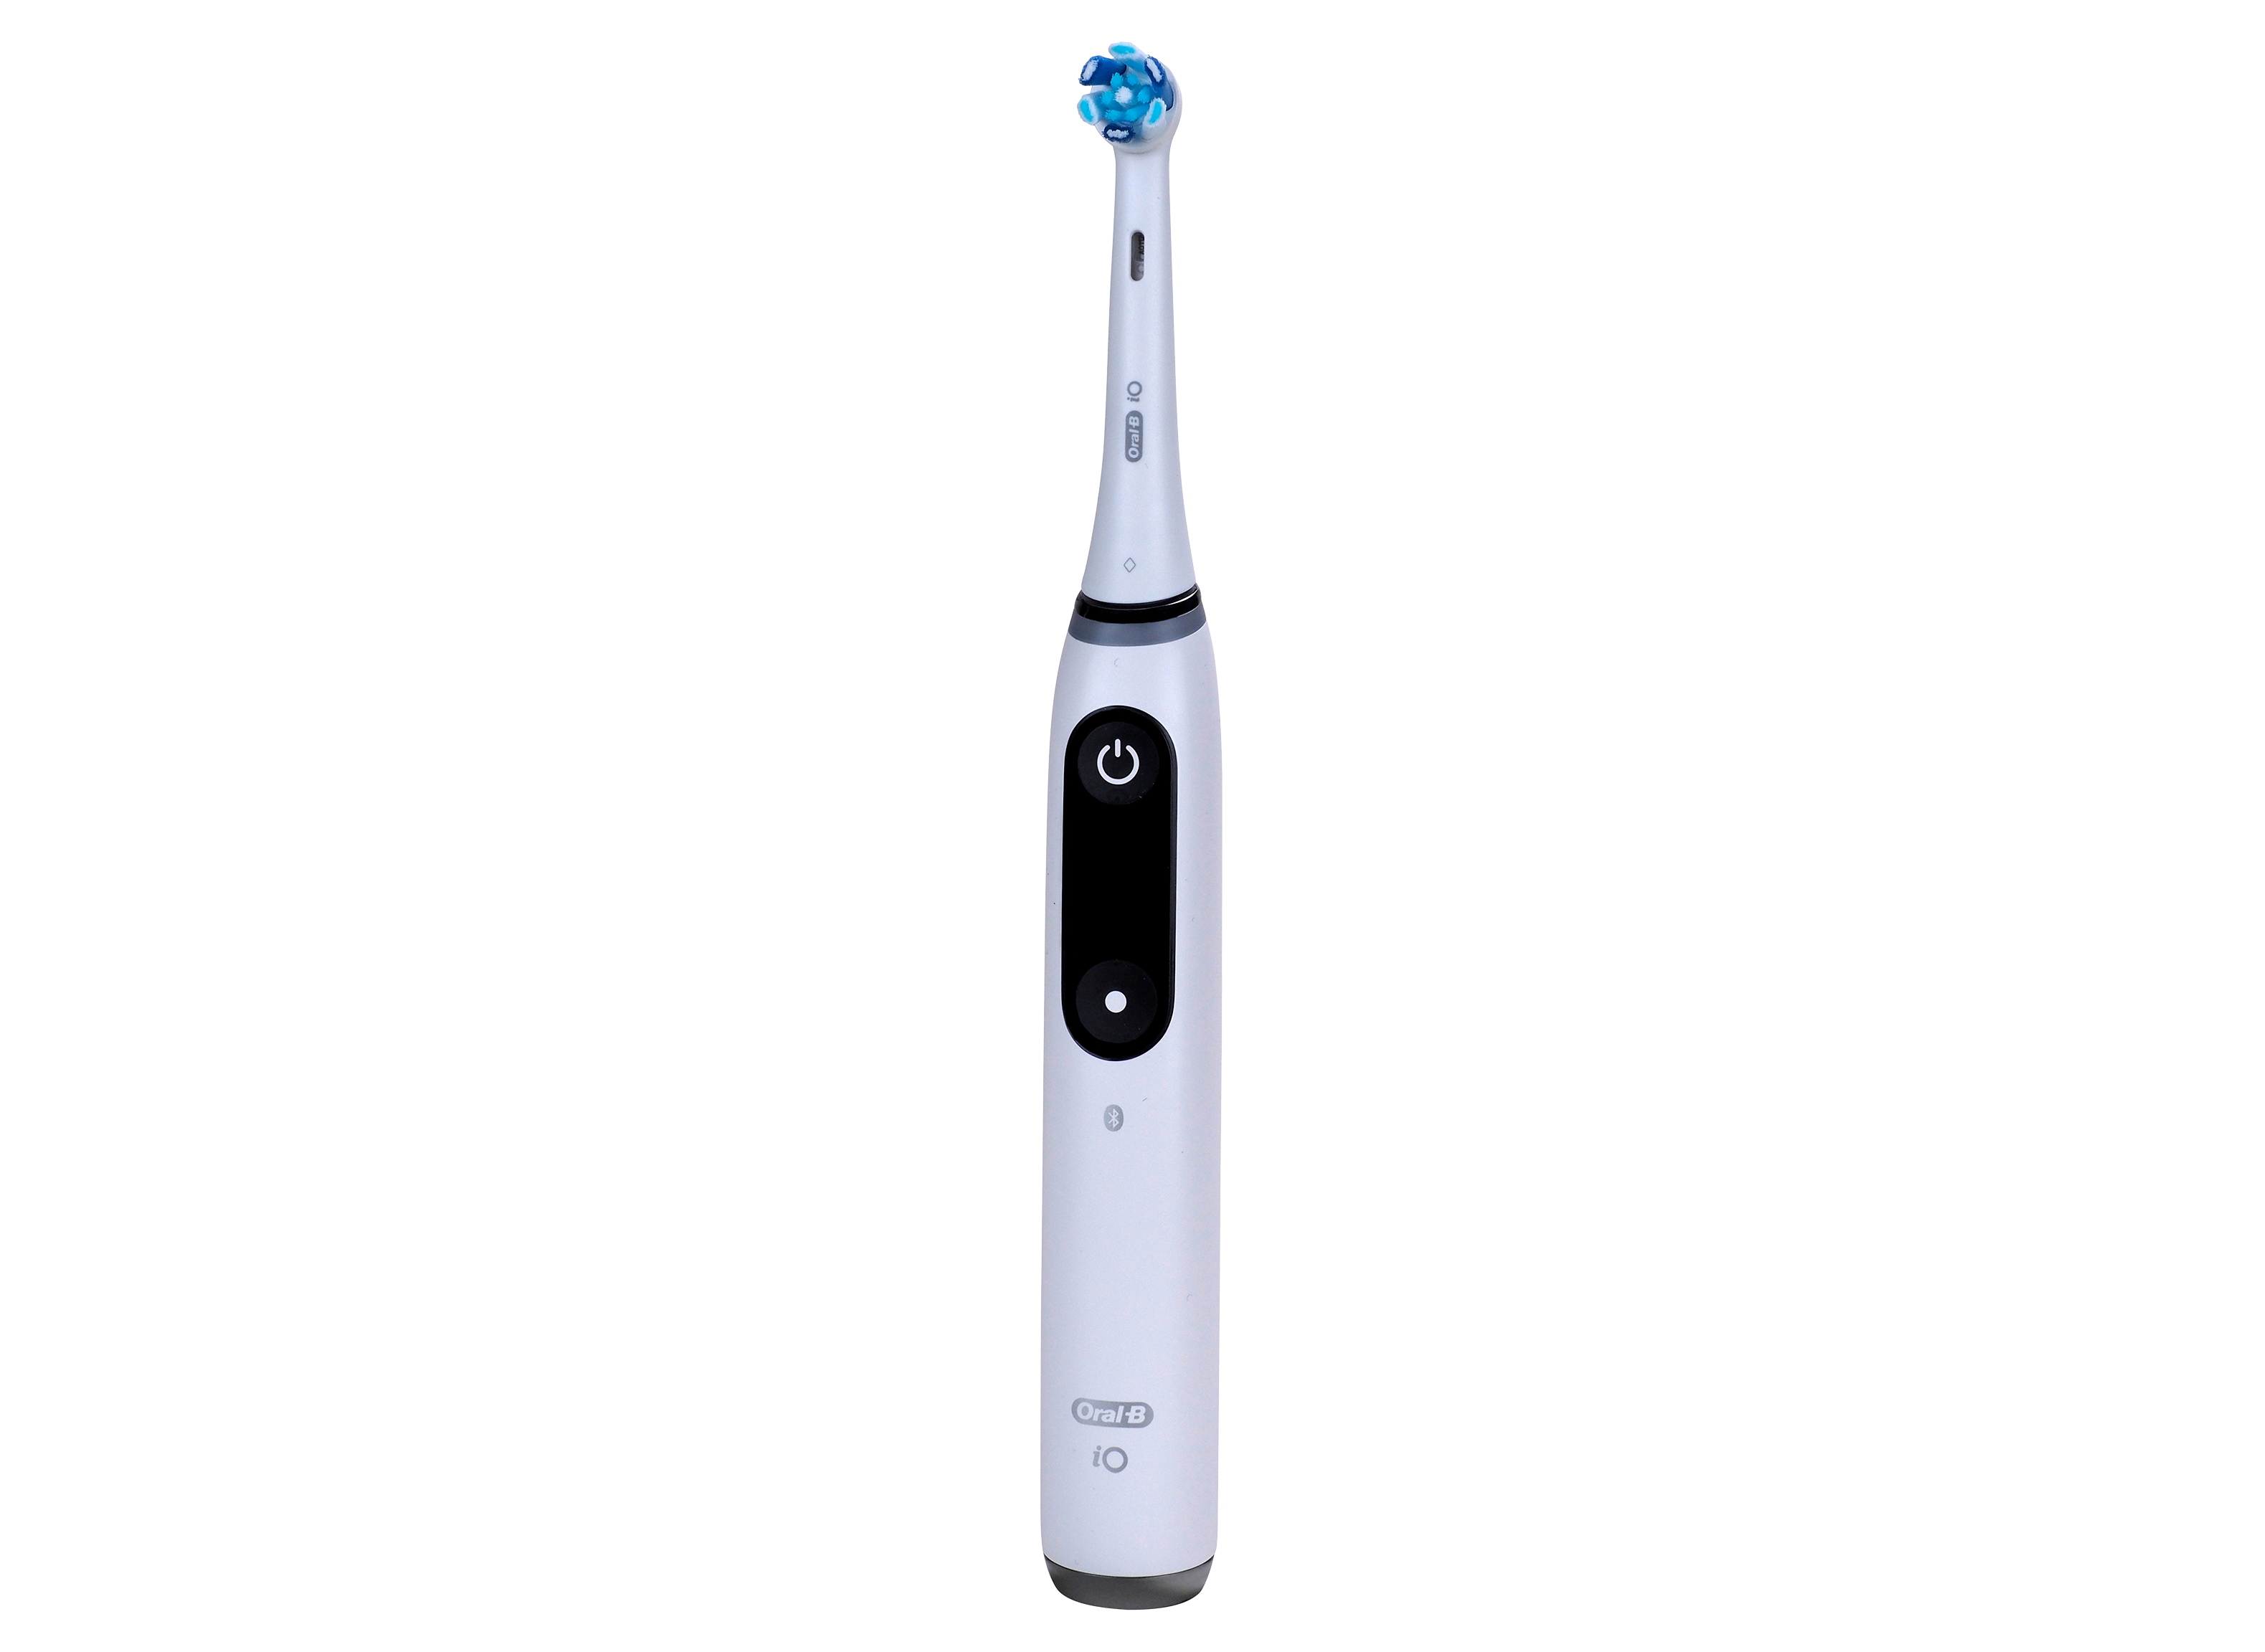 https://crdms.images.consumerreports.org/prod/products/cr/models/403091-electric-toothbrushes-oral-b-io-7-series-10018084.png